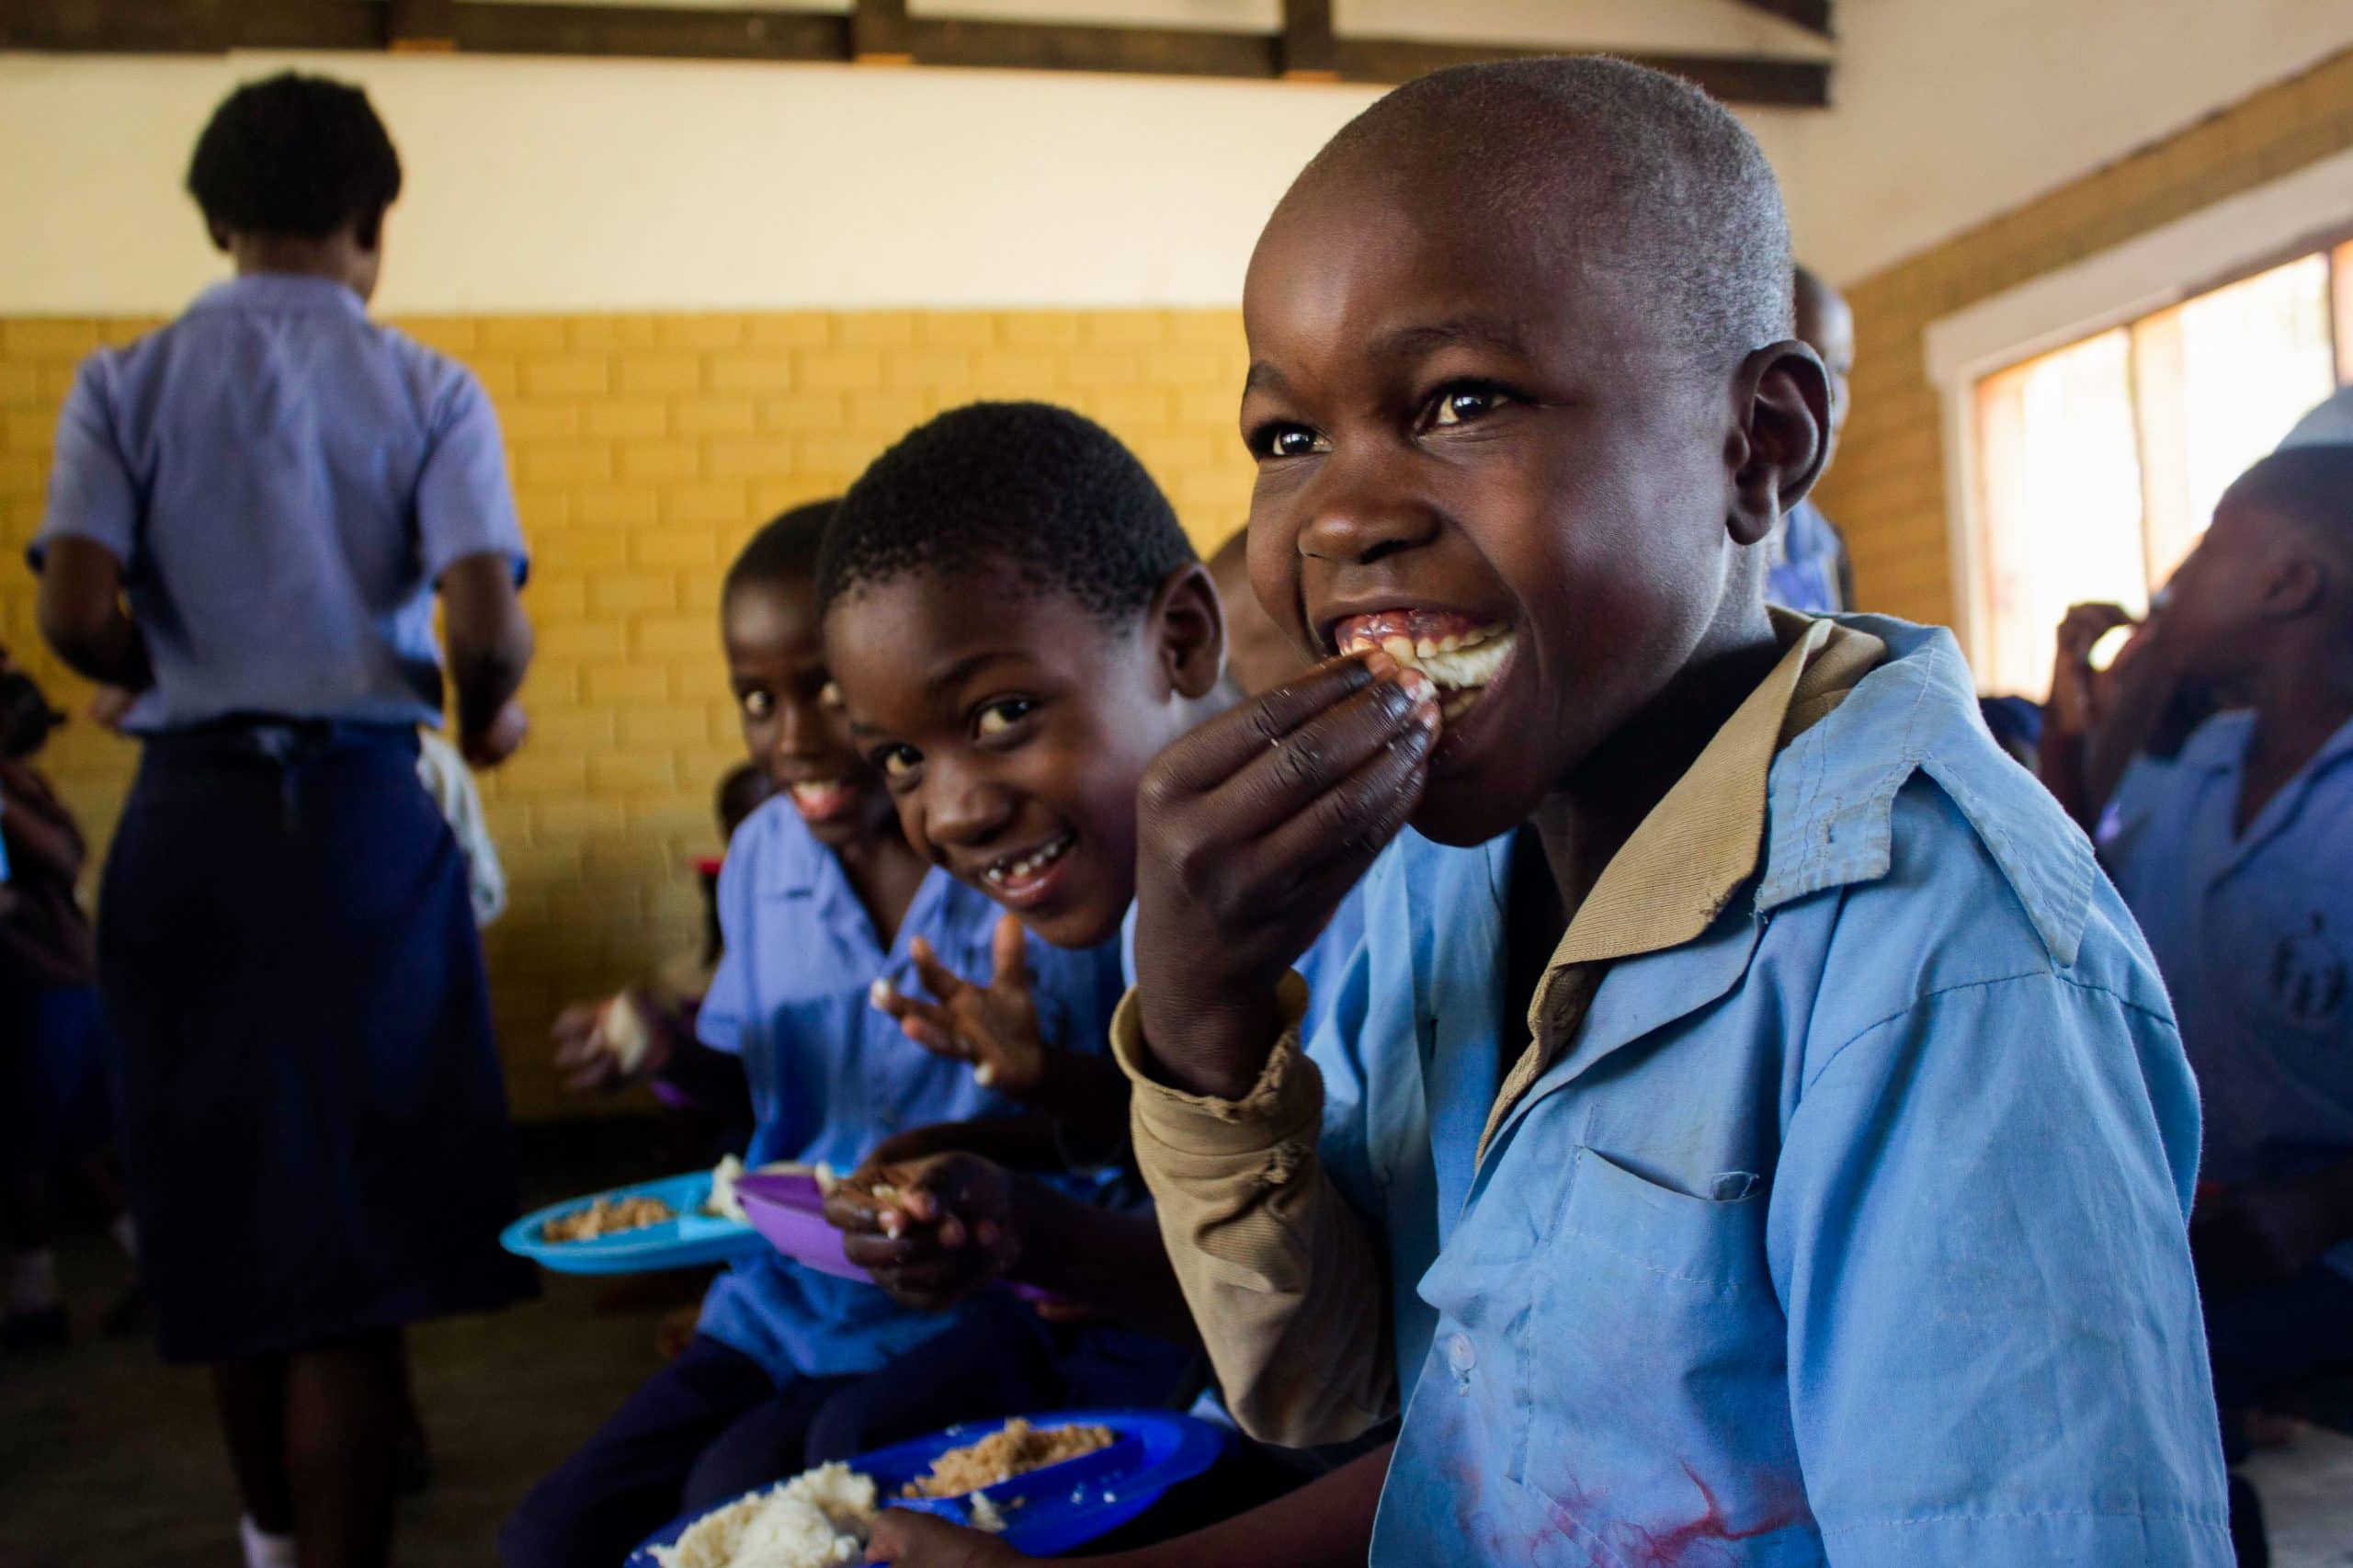 School kids in Zambia sitting on a bench and eating Zambia's staple food: Shima.